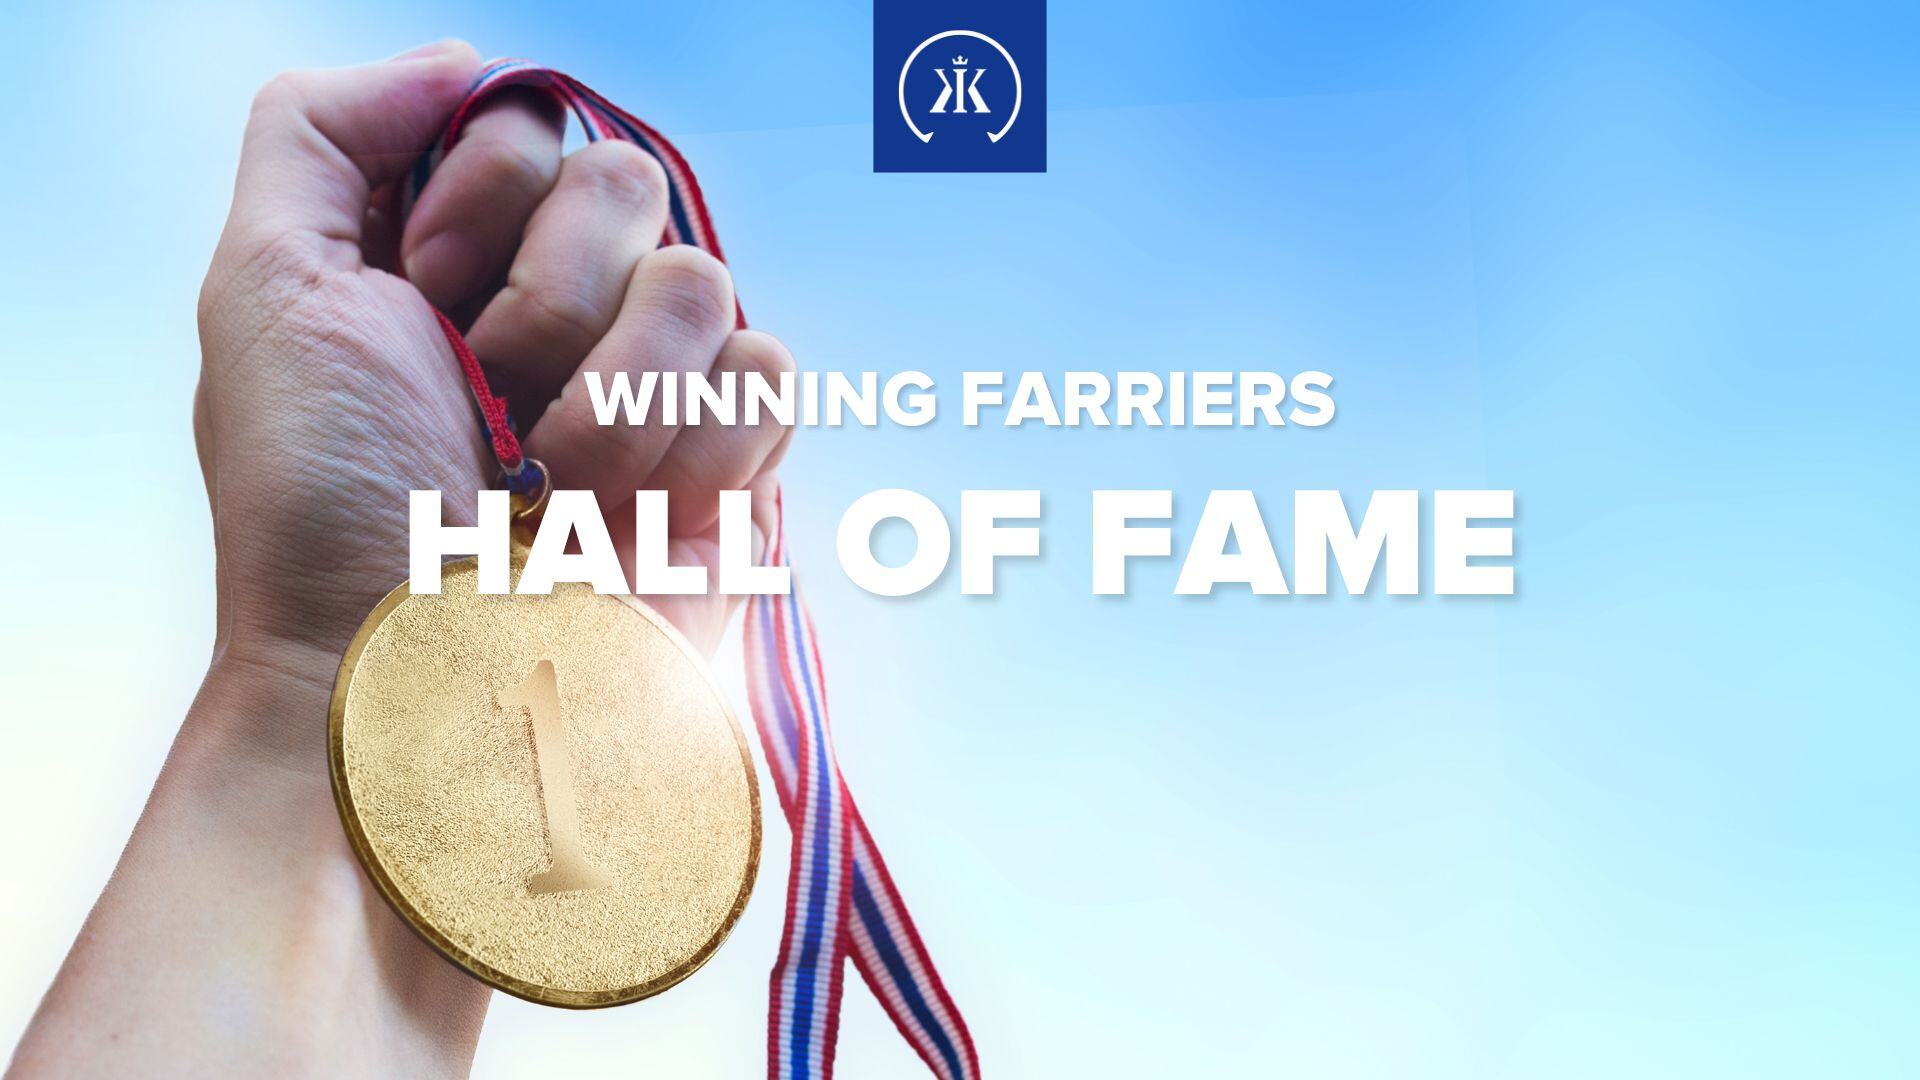 Hall of Fame with the Winning Farriers